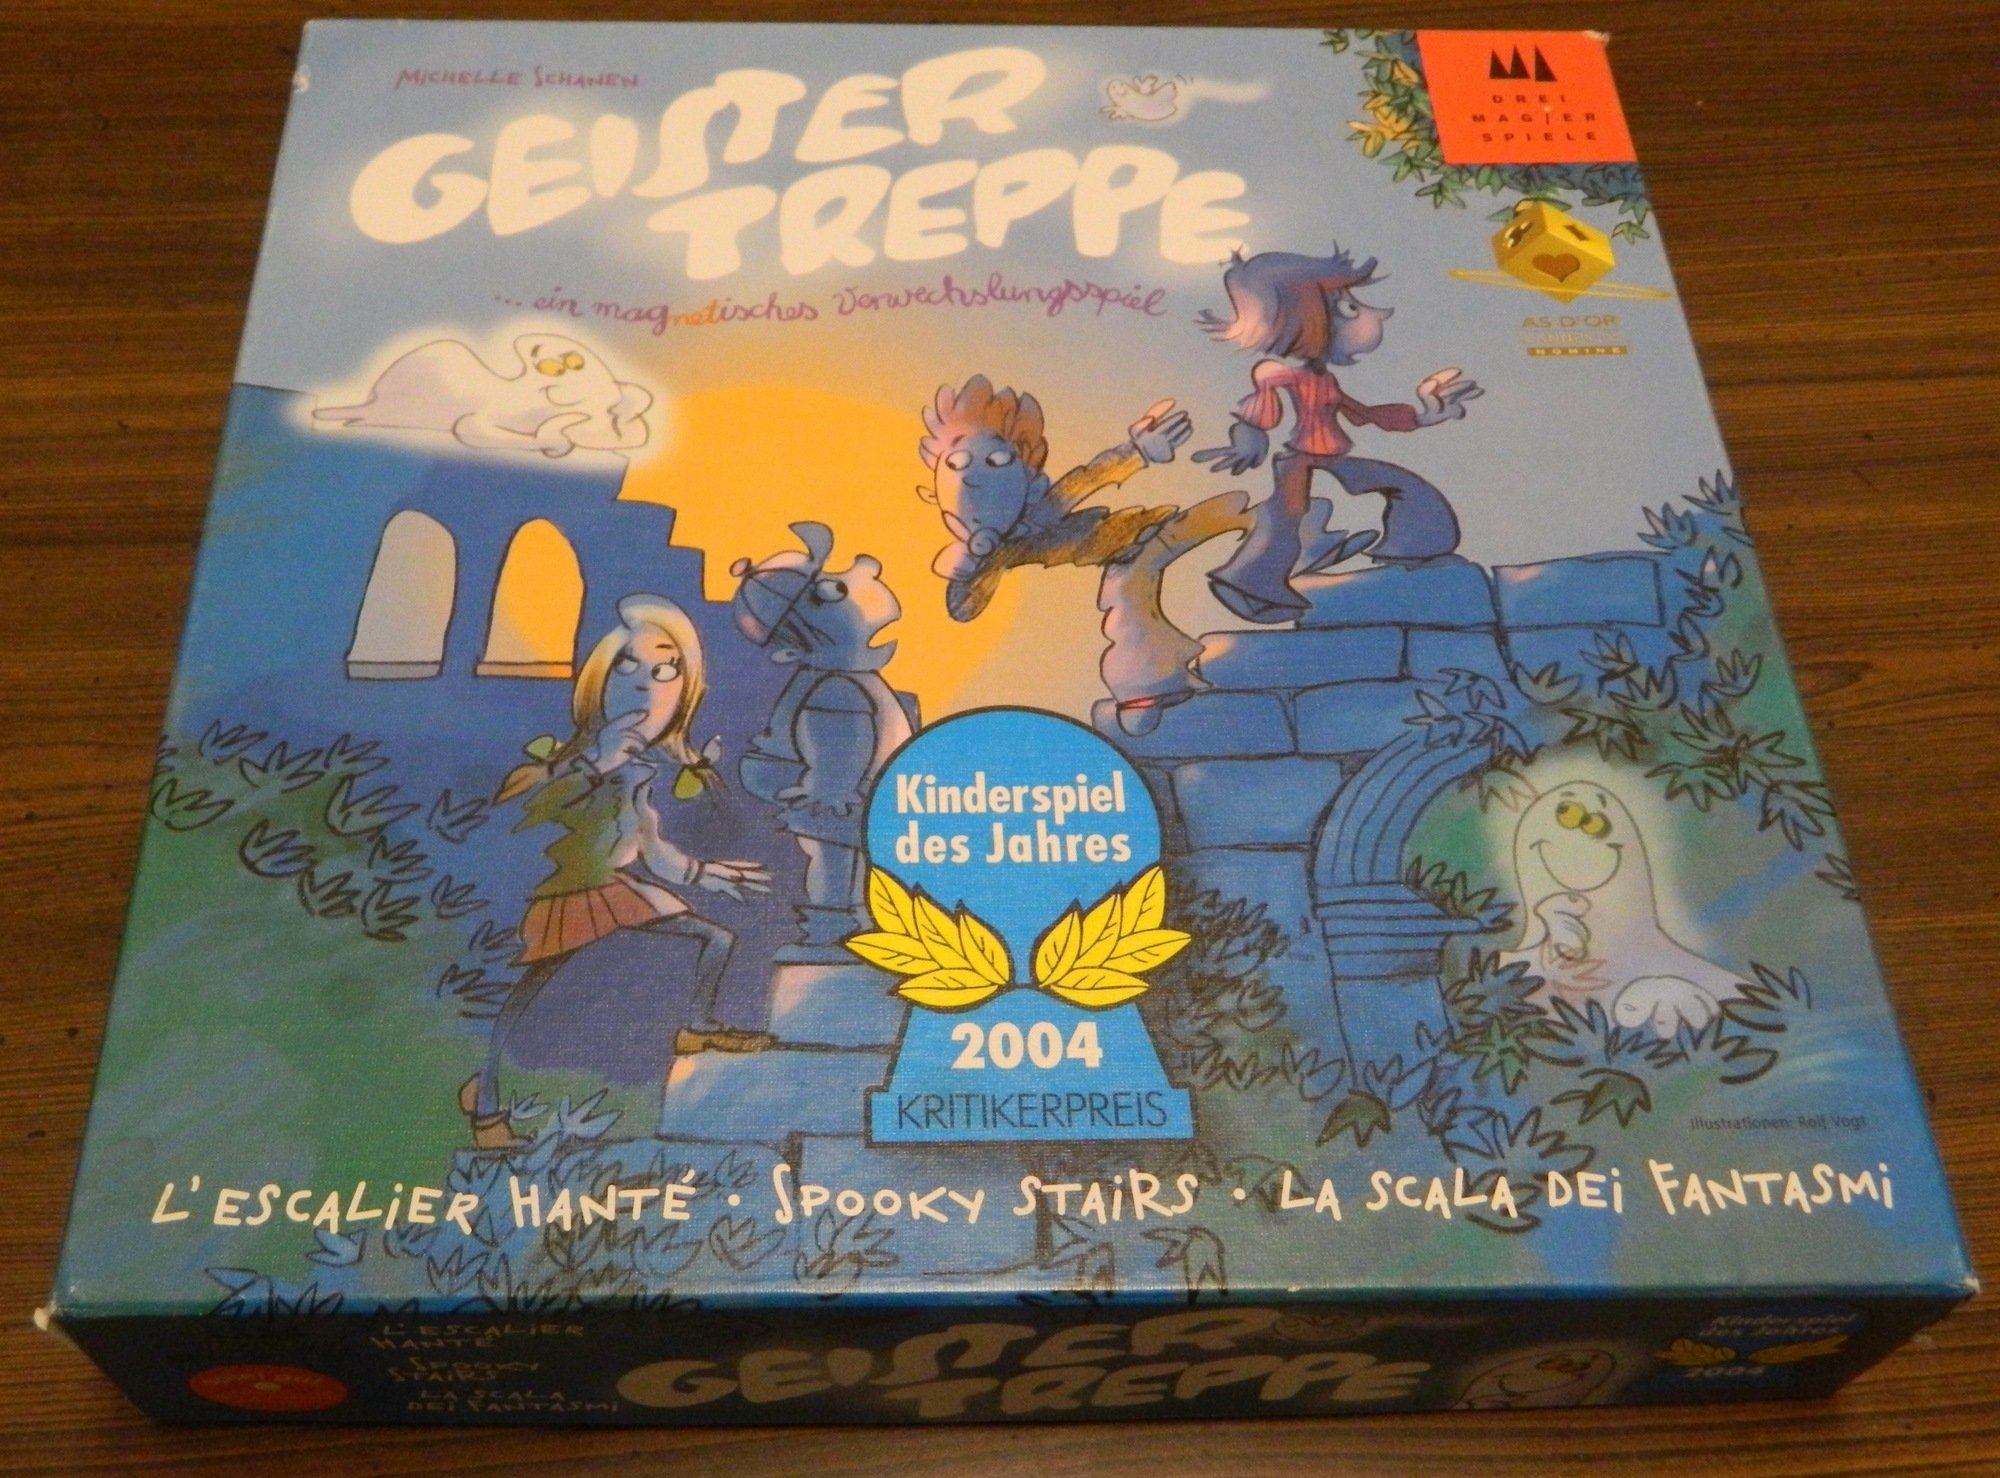 Spooky Stairs (AKA Geistertreppe) Board Game Review and Rules